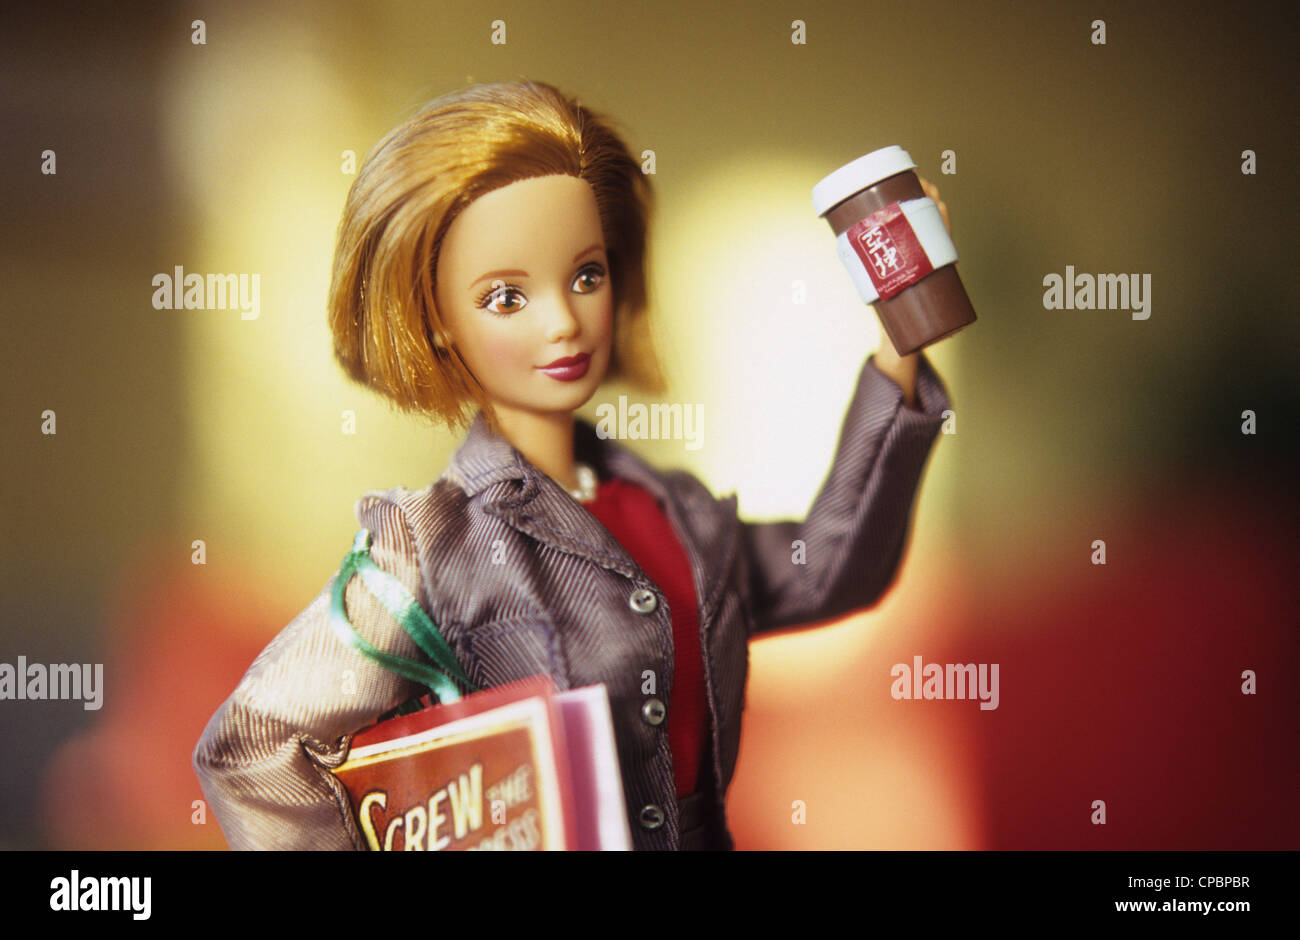 Expat Barbie in Singapore is a successful businesswoman. She has picked up the local preoccupation with food and coffee or Stock Photo - Alamy